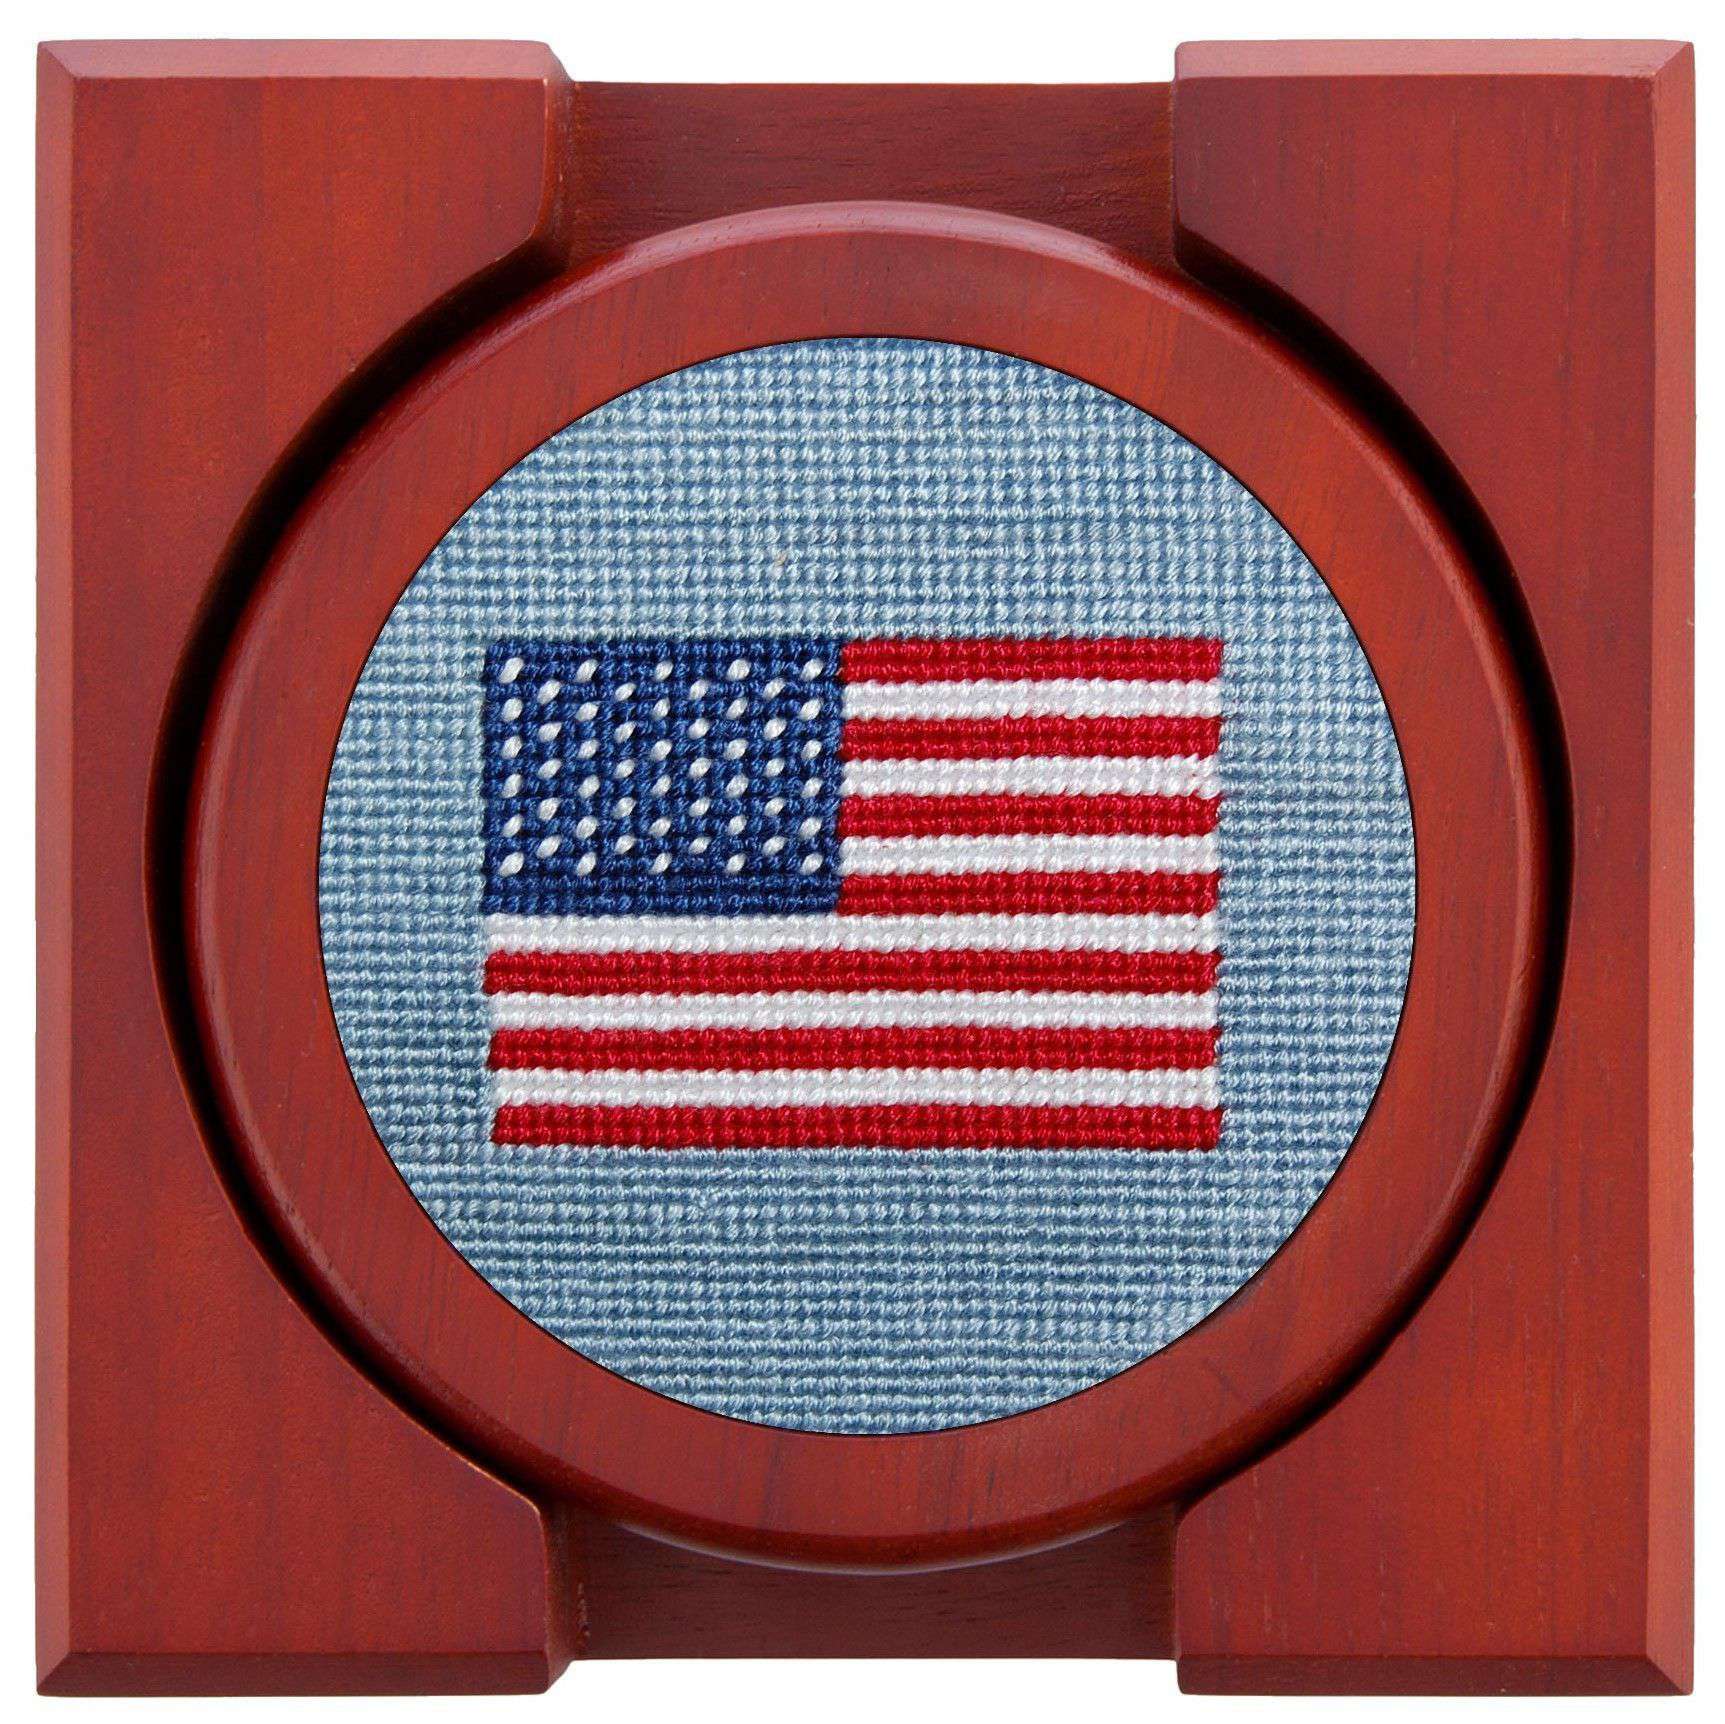 American Flag Needlepoint Coasters in Antique Blue by Smathers & Branson - Country Club Prep